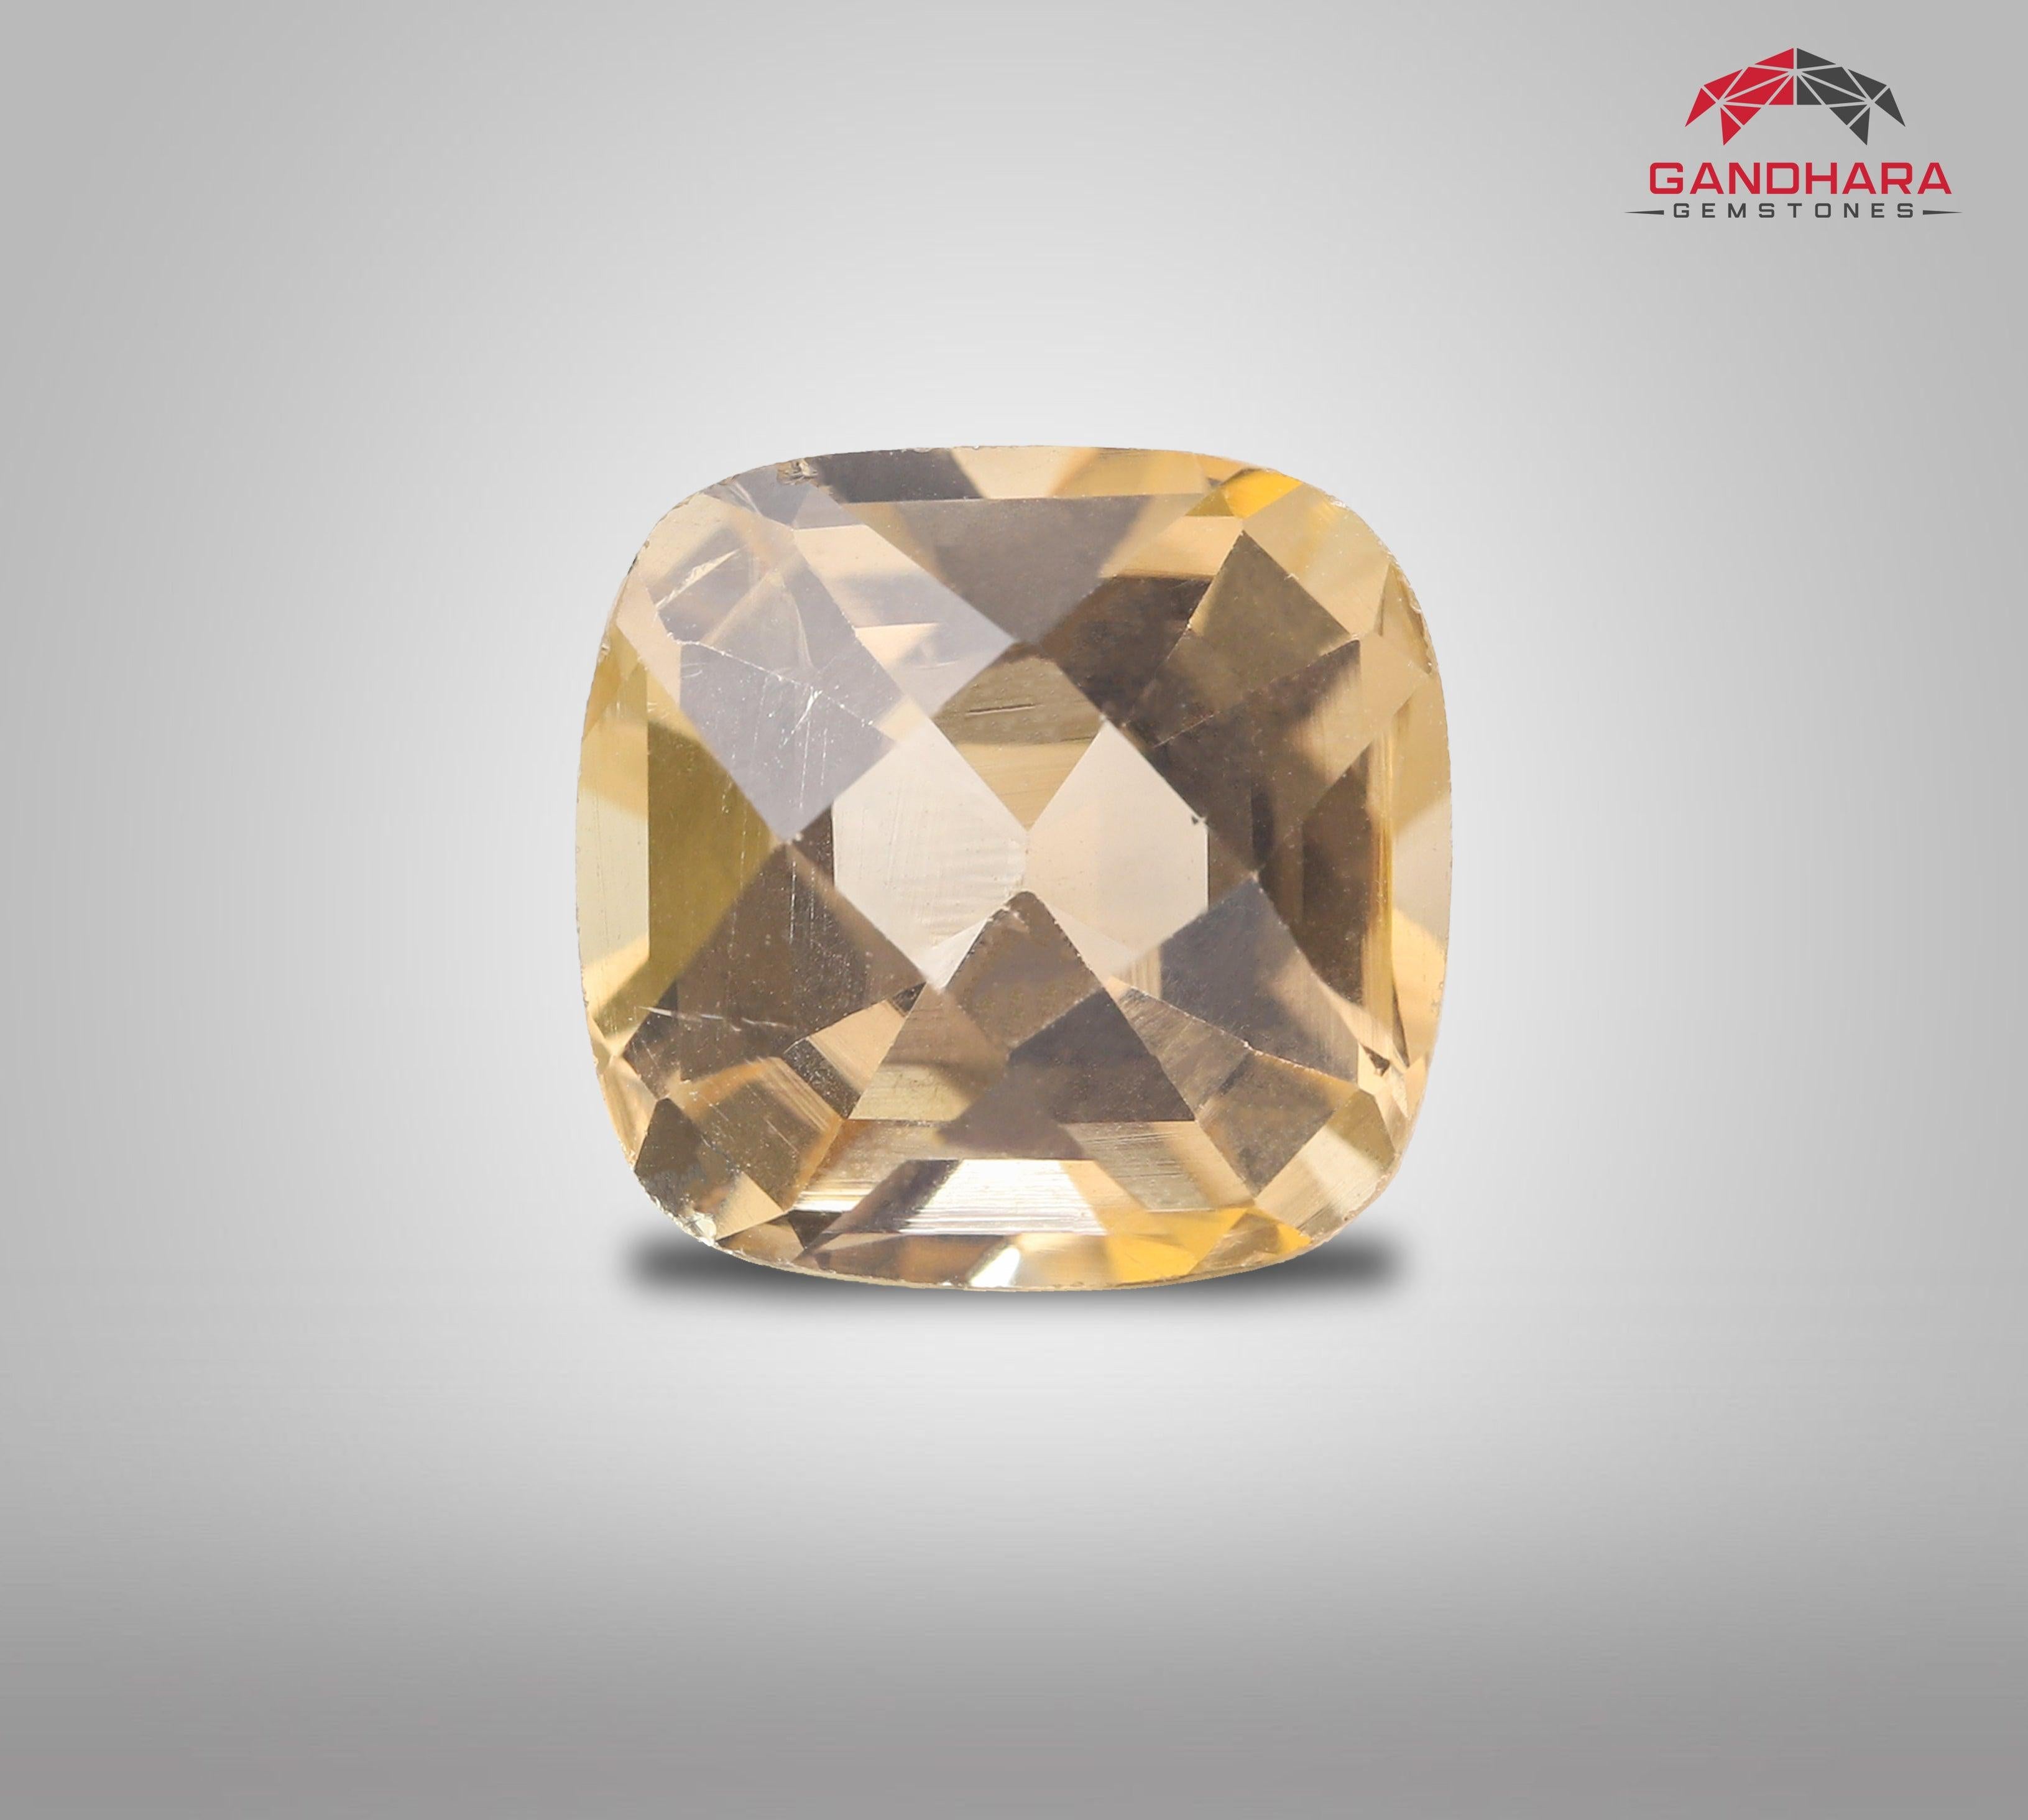 Deep Golden Natural Topaz Stone, available for sale at wholesale price, natural high-quality 3.44 carats flawless loupe clean clarity, certified topaz from Pakistan.

Product Information:
GEMSTONE NAME: Deep Golden Natural Topaz Stone
WEIGHT:	3.44